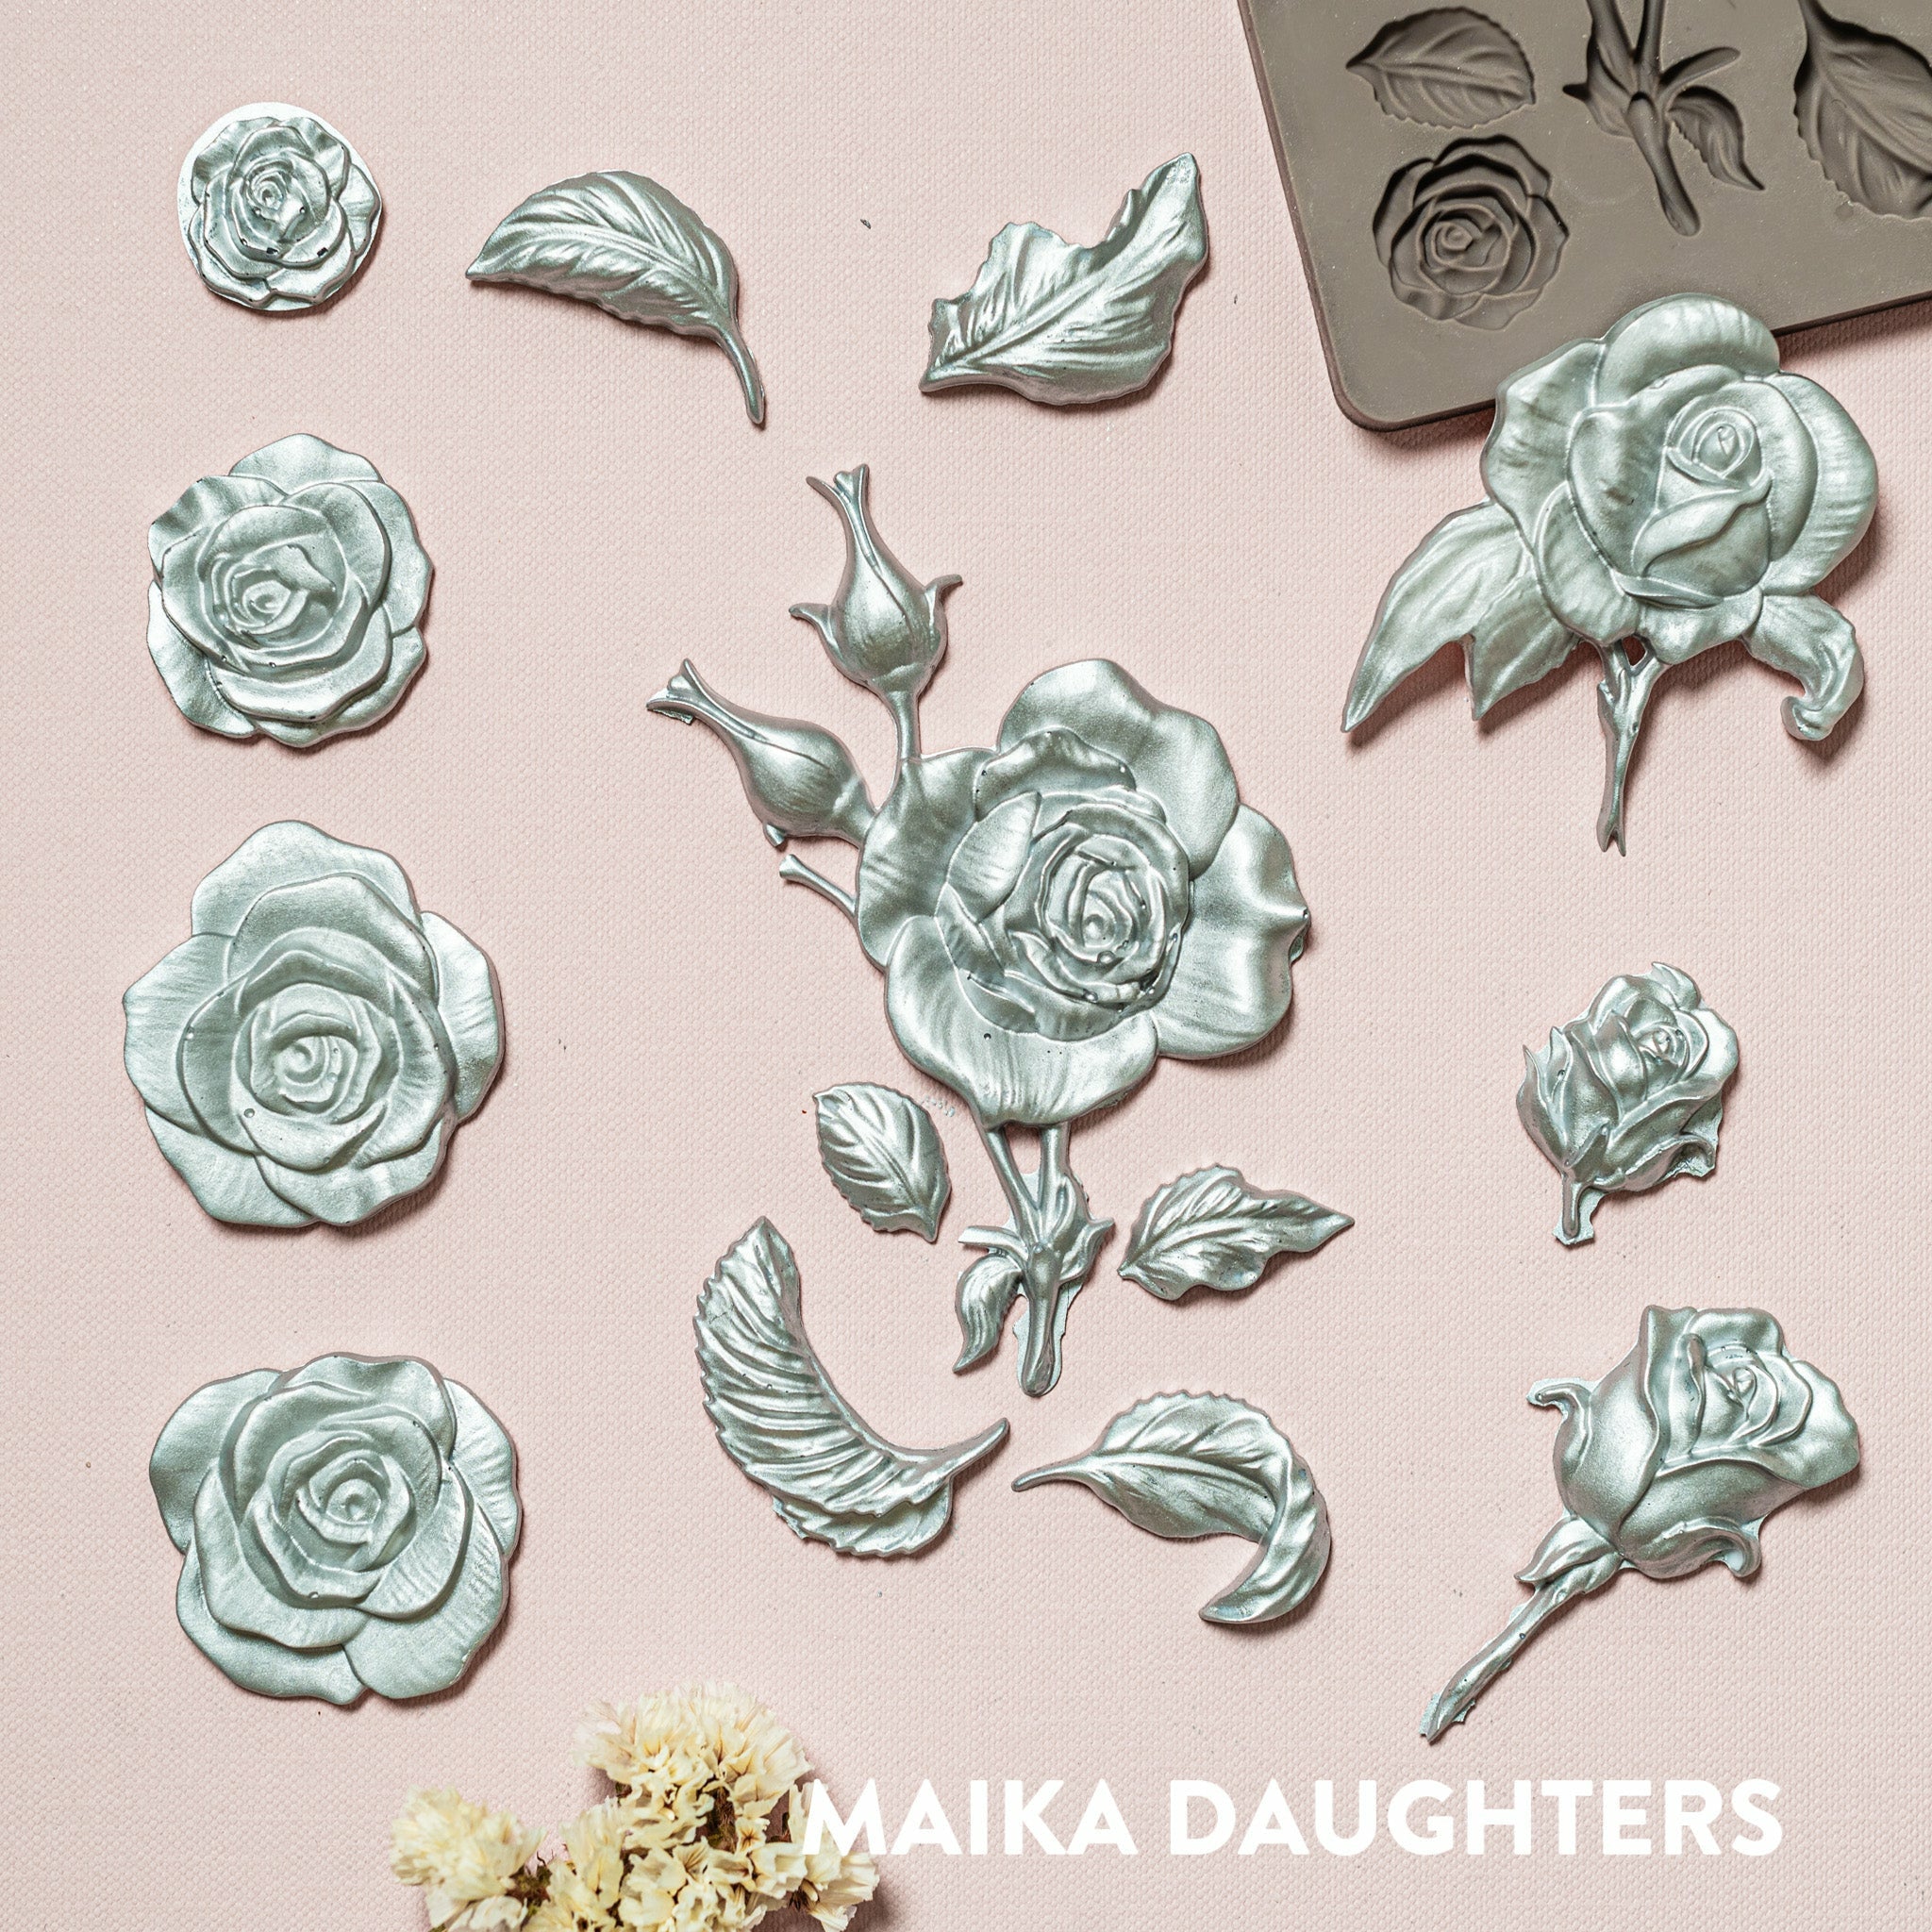 Silver colored silicone castings of rose blooms and leaves are against a light pink background.